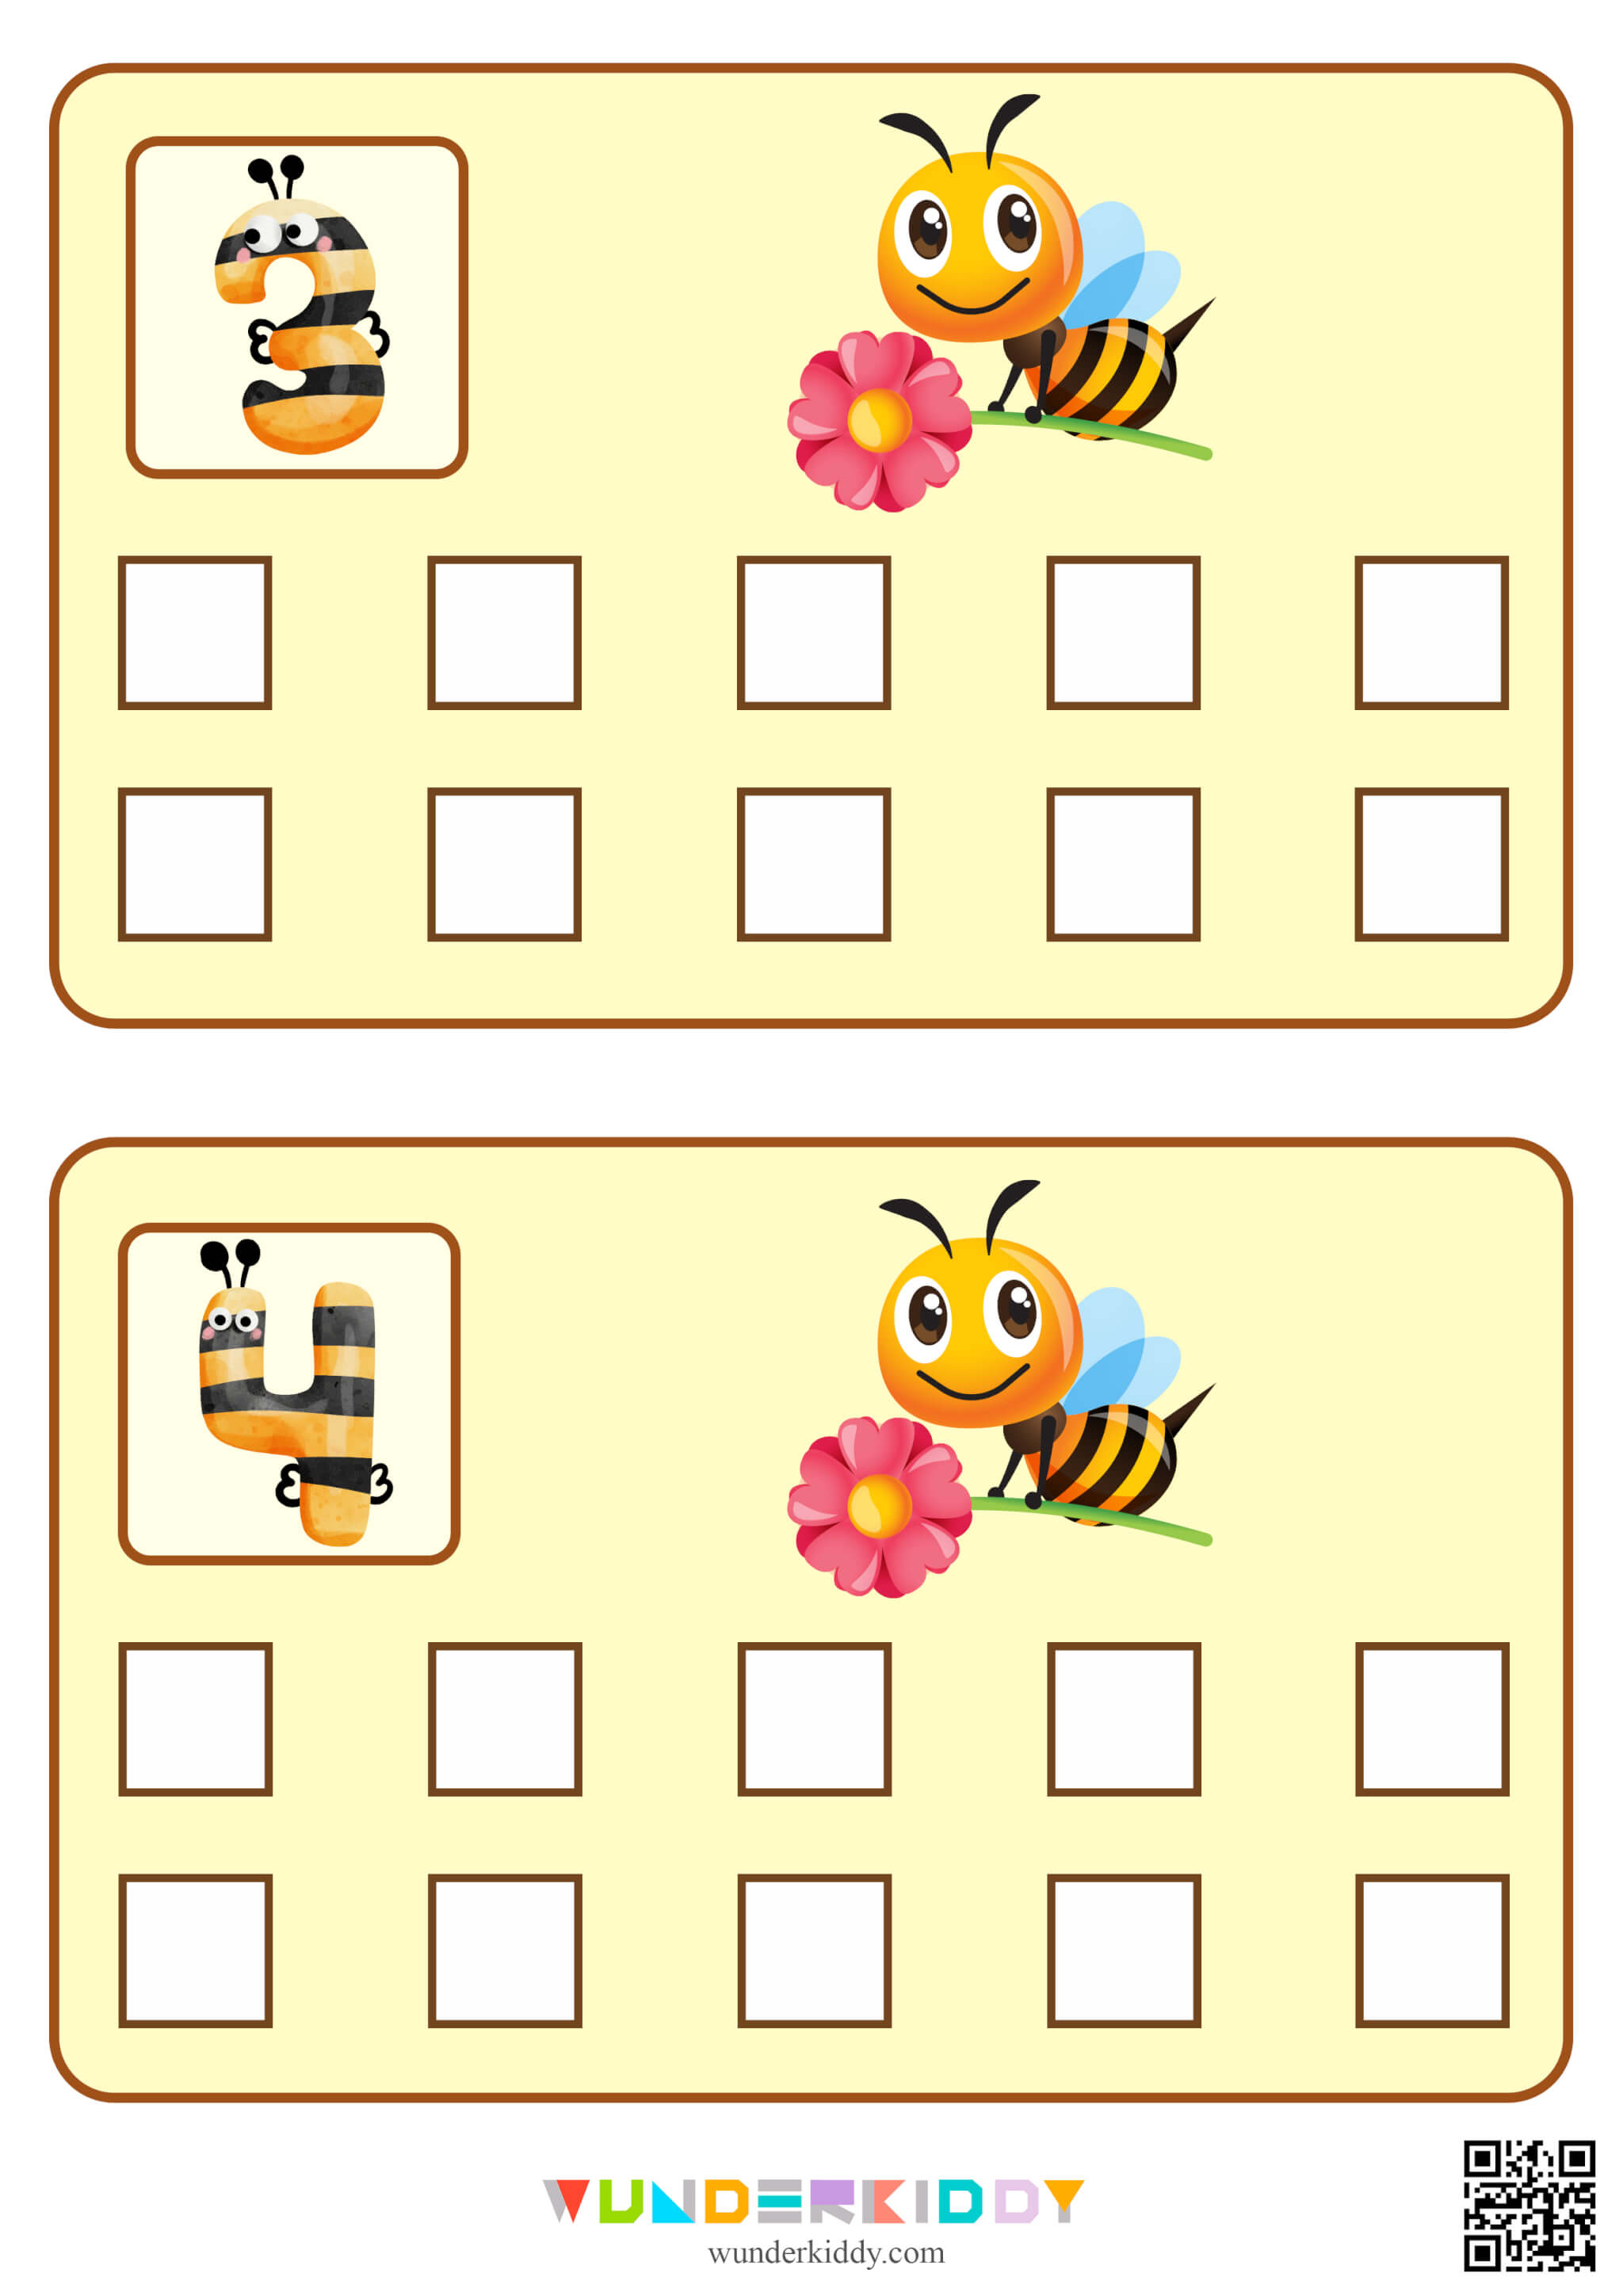 Flashcards to Practice Counting How Many Bees? - Image 3